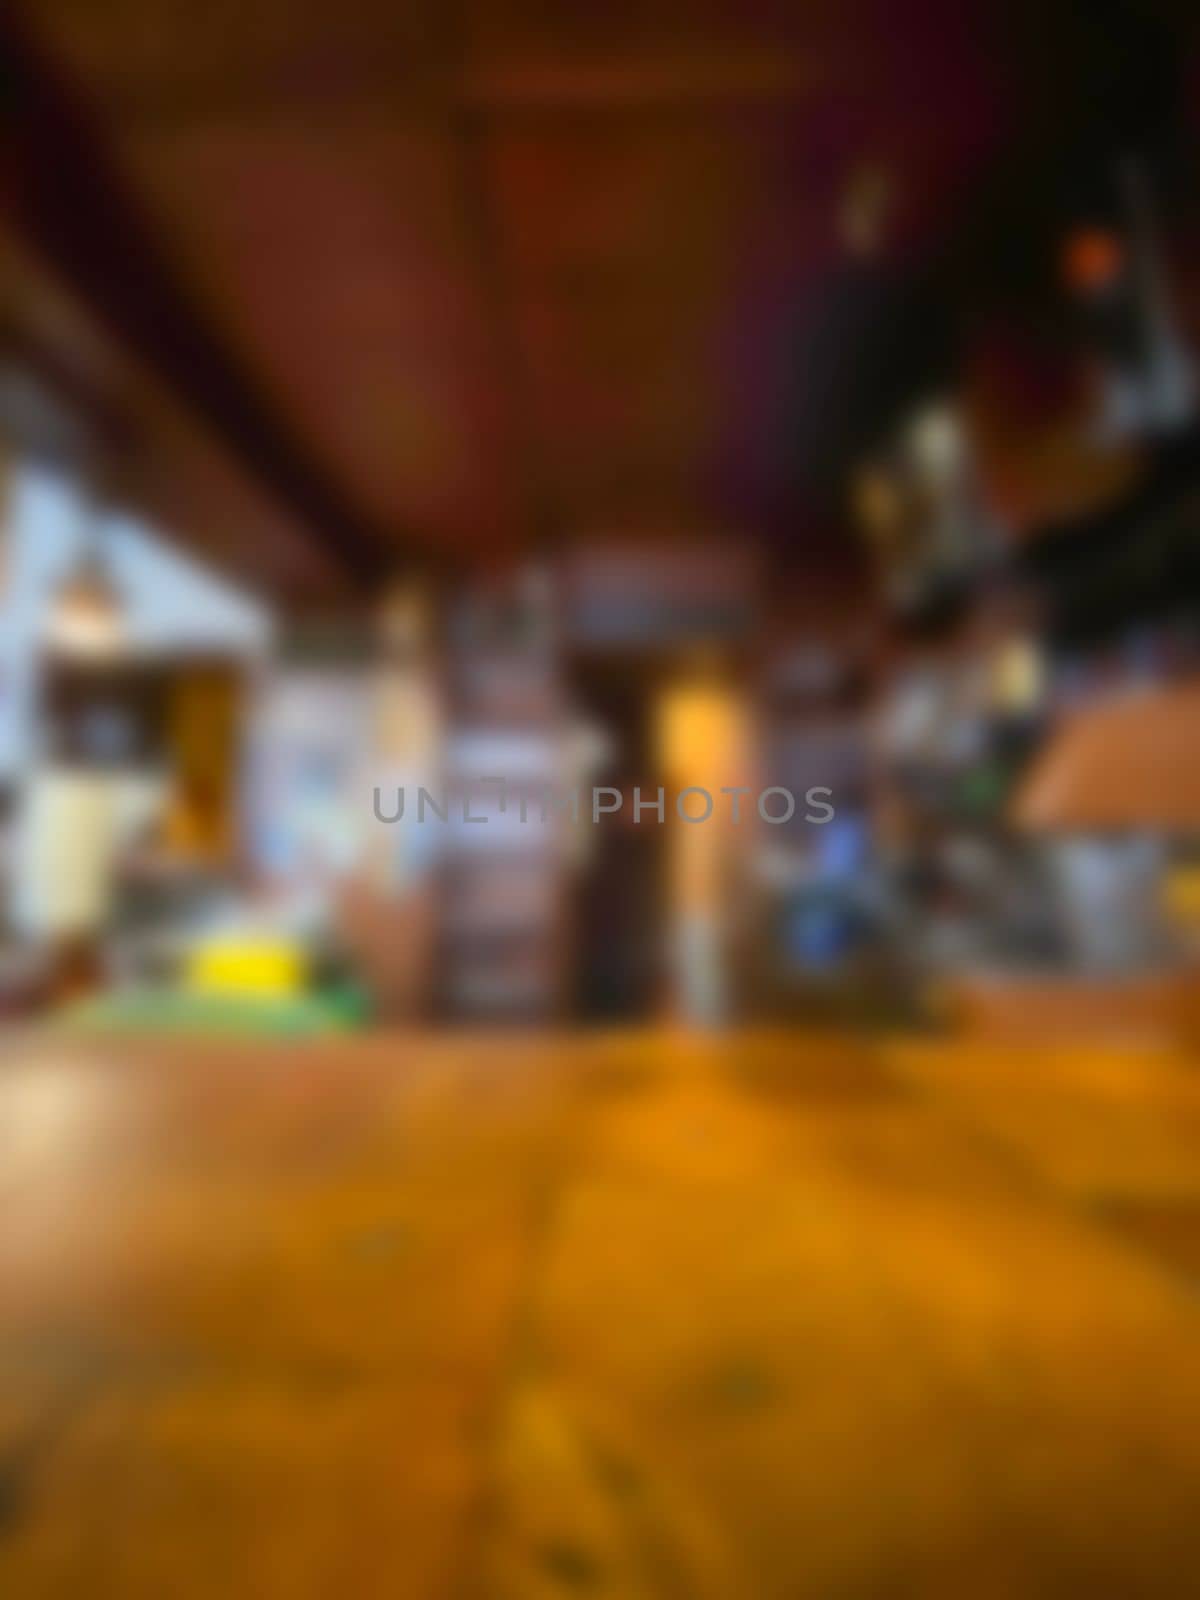 defocused on purpose. Wood table Bar counter in dark night cafe,restaurant background .Lifestyle and celebration concepts ideas